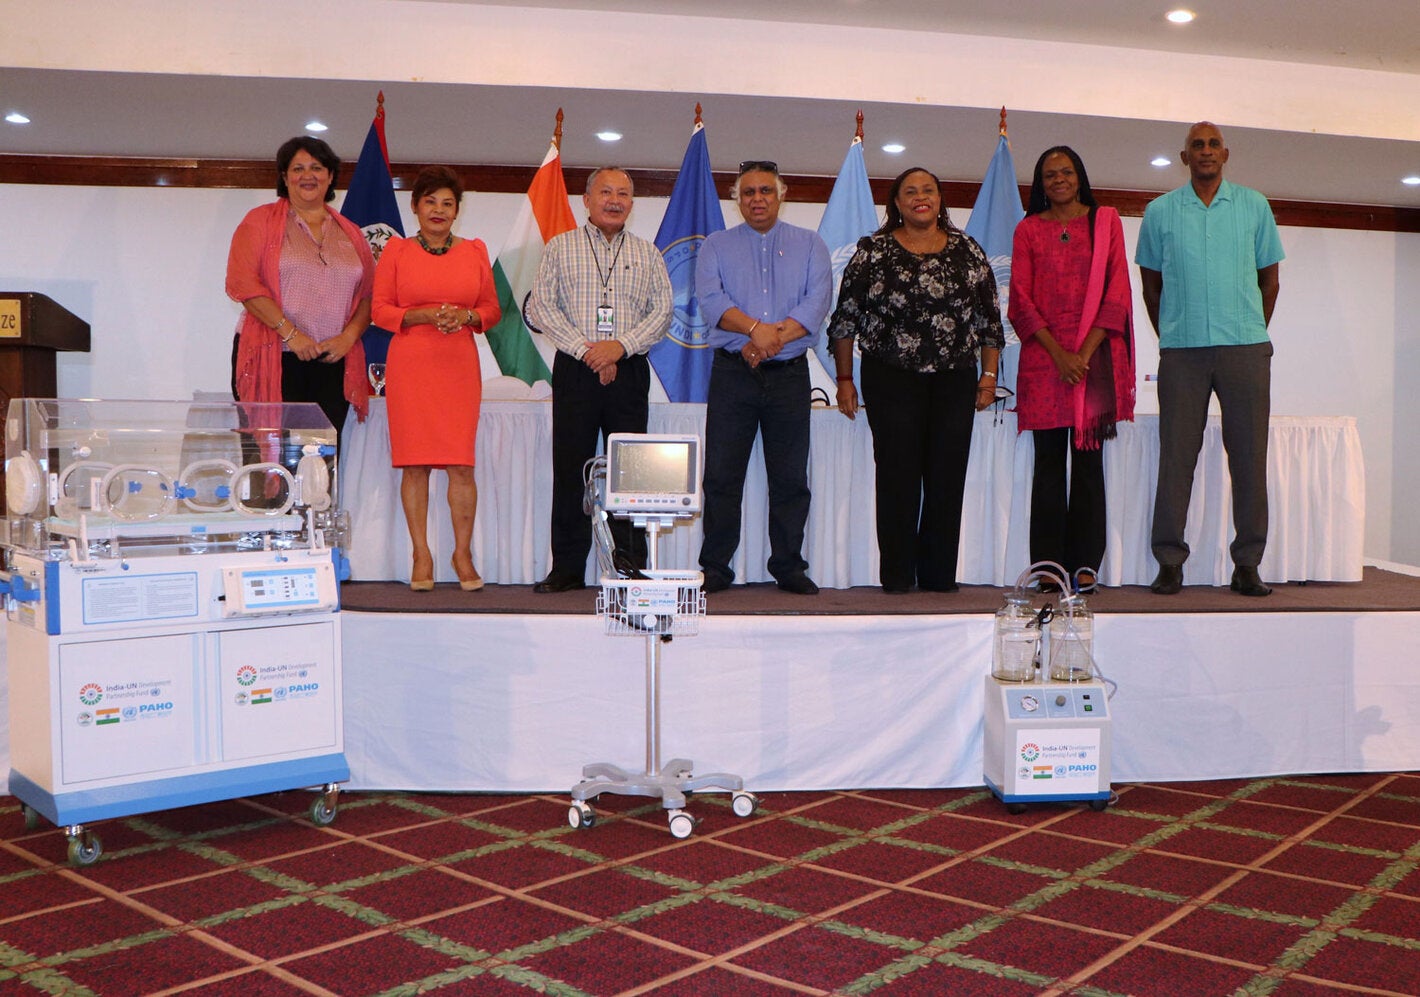 Formal Handover Ceremony of Equipment through the India-UN Grant to the MoHW in Belize